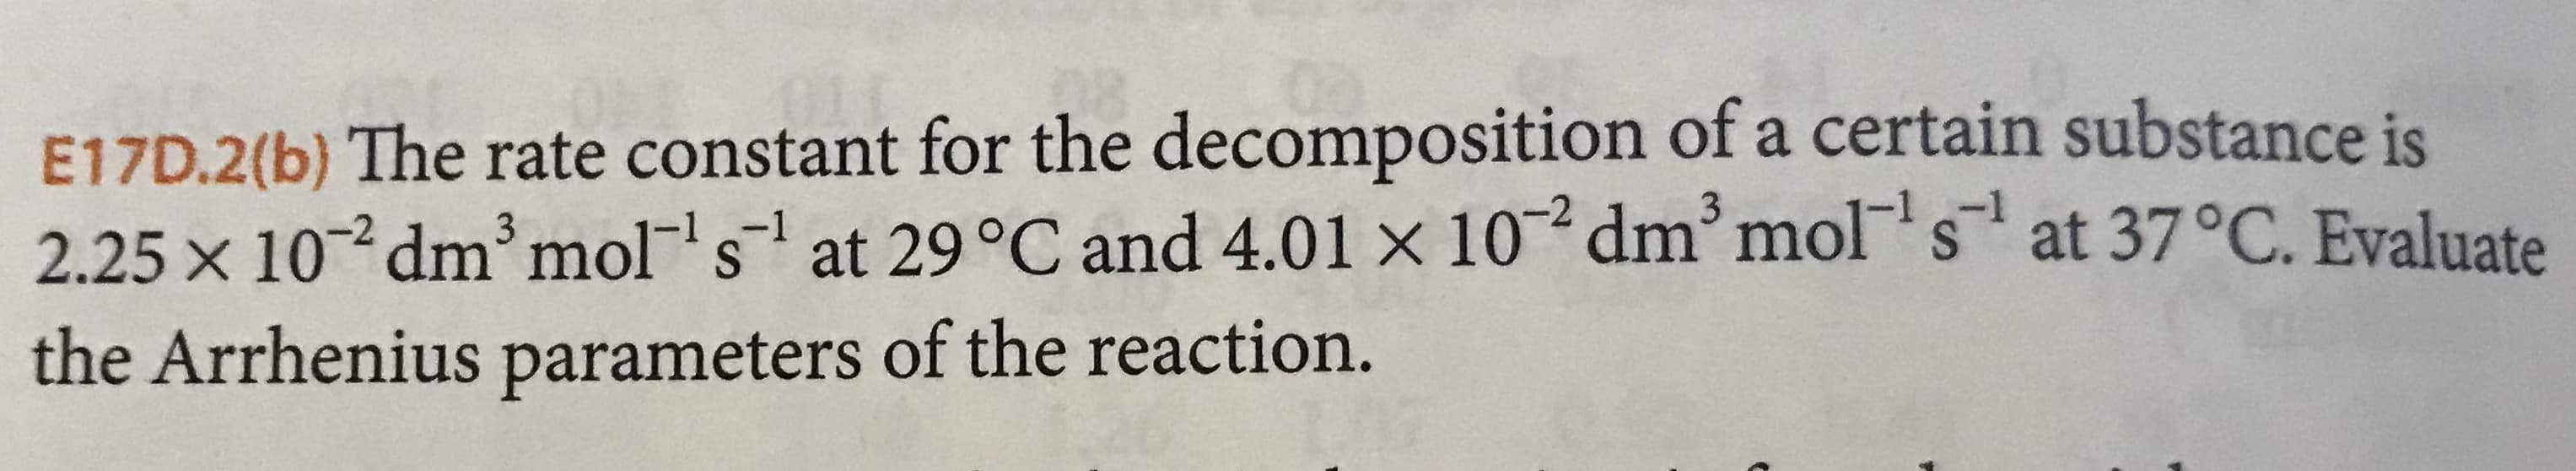 E17D.2(b) The rate constant for the decomposition of a certain substance is
2.25 x 10 dm mol s
the Arrhenius parameters of the reaction.
-1
at 29 °C and 4.01 x 10 dm'mol s
at 37°C. Evaluate
